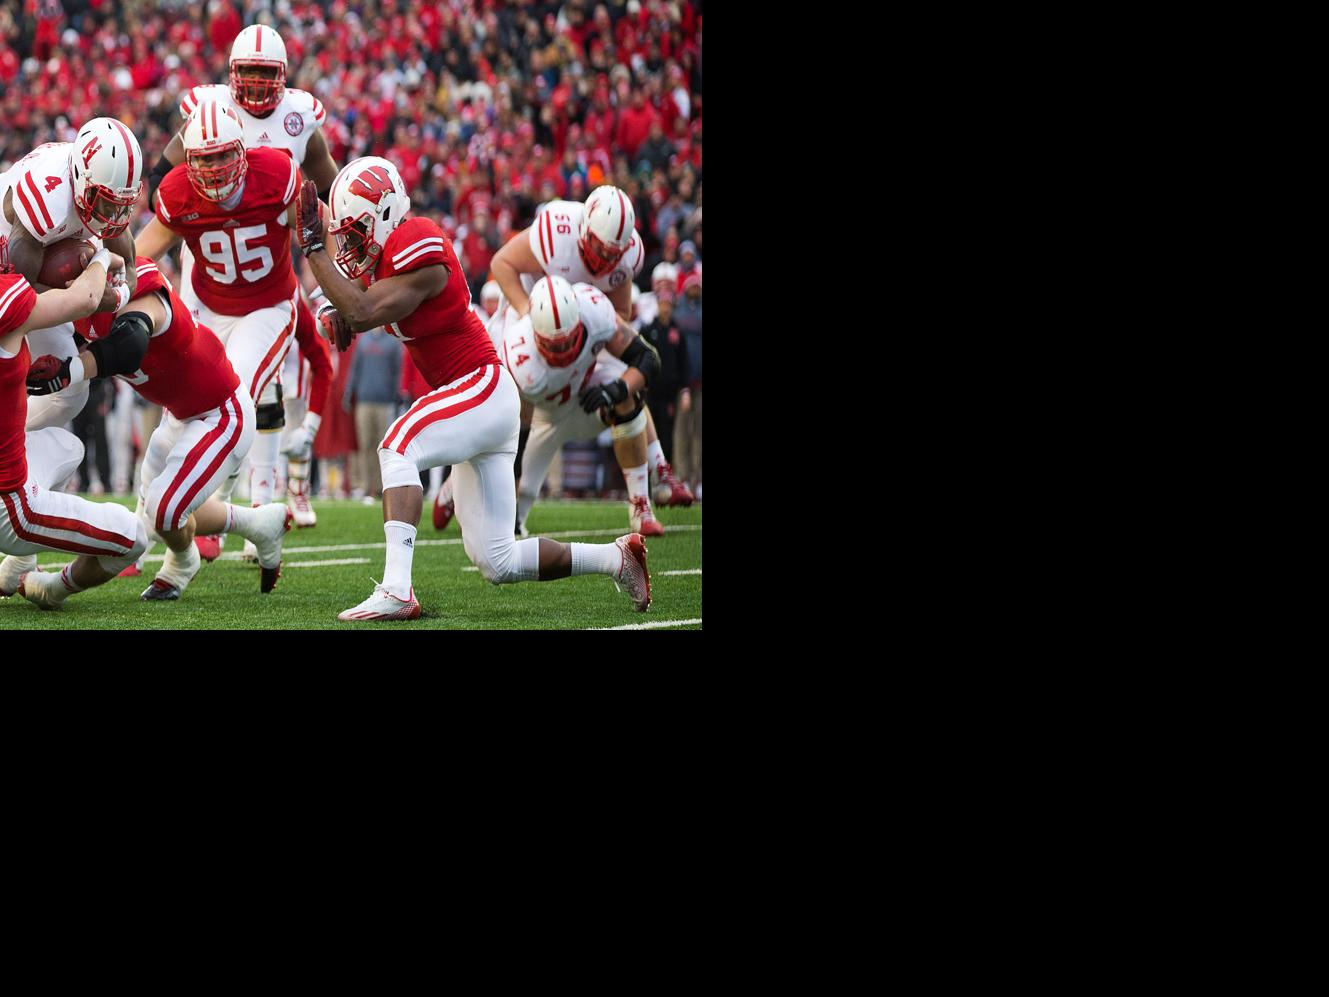 Nebraska drops to 23 in College Football Playoff rankings | Big Red